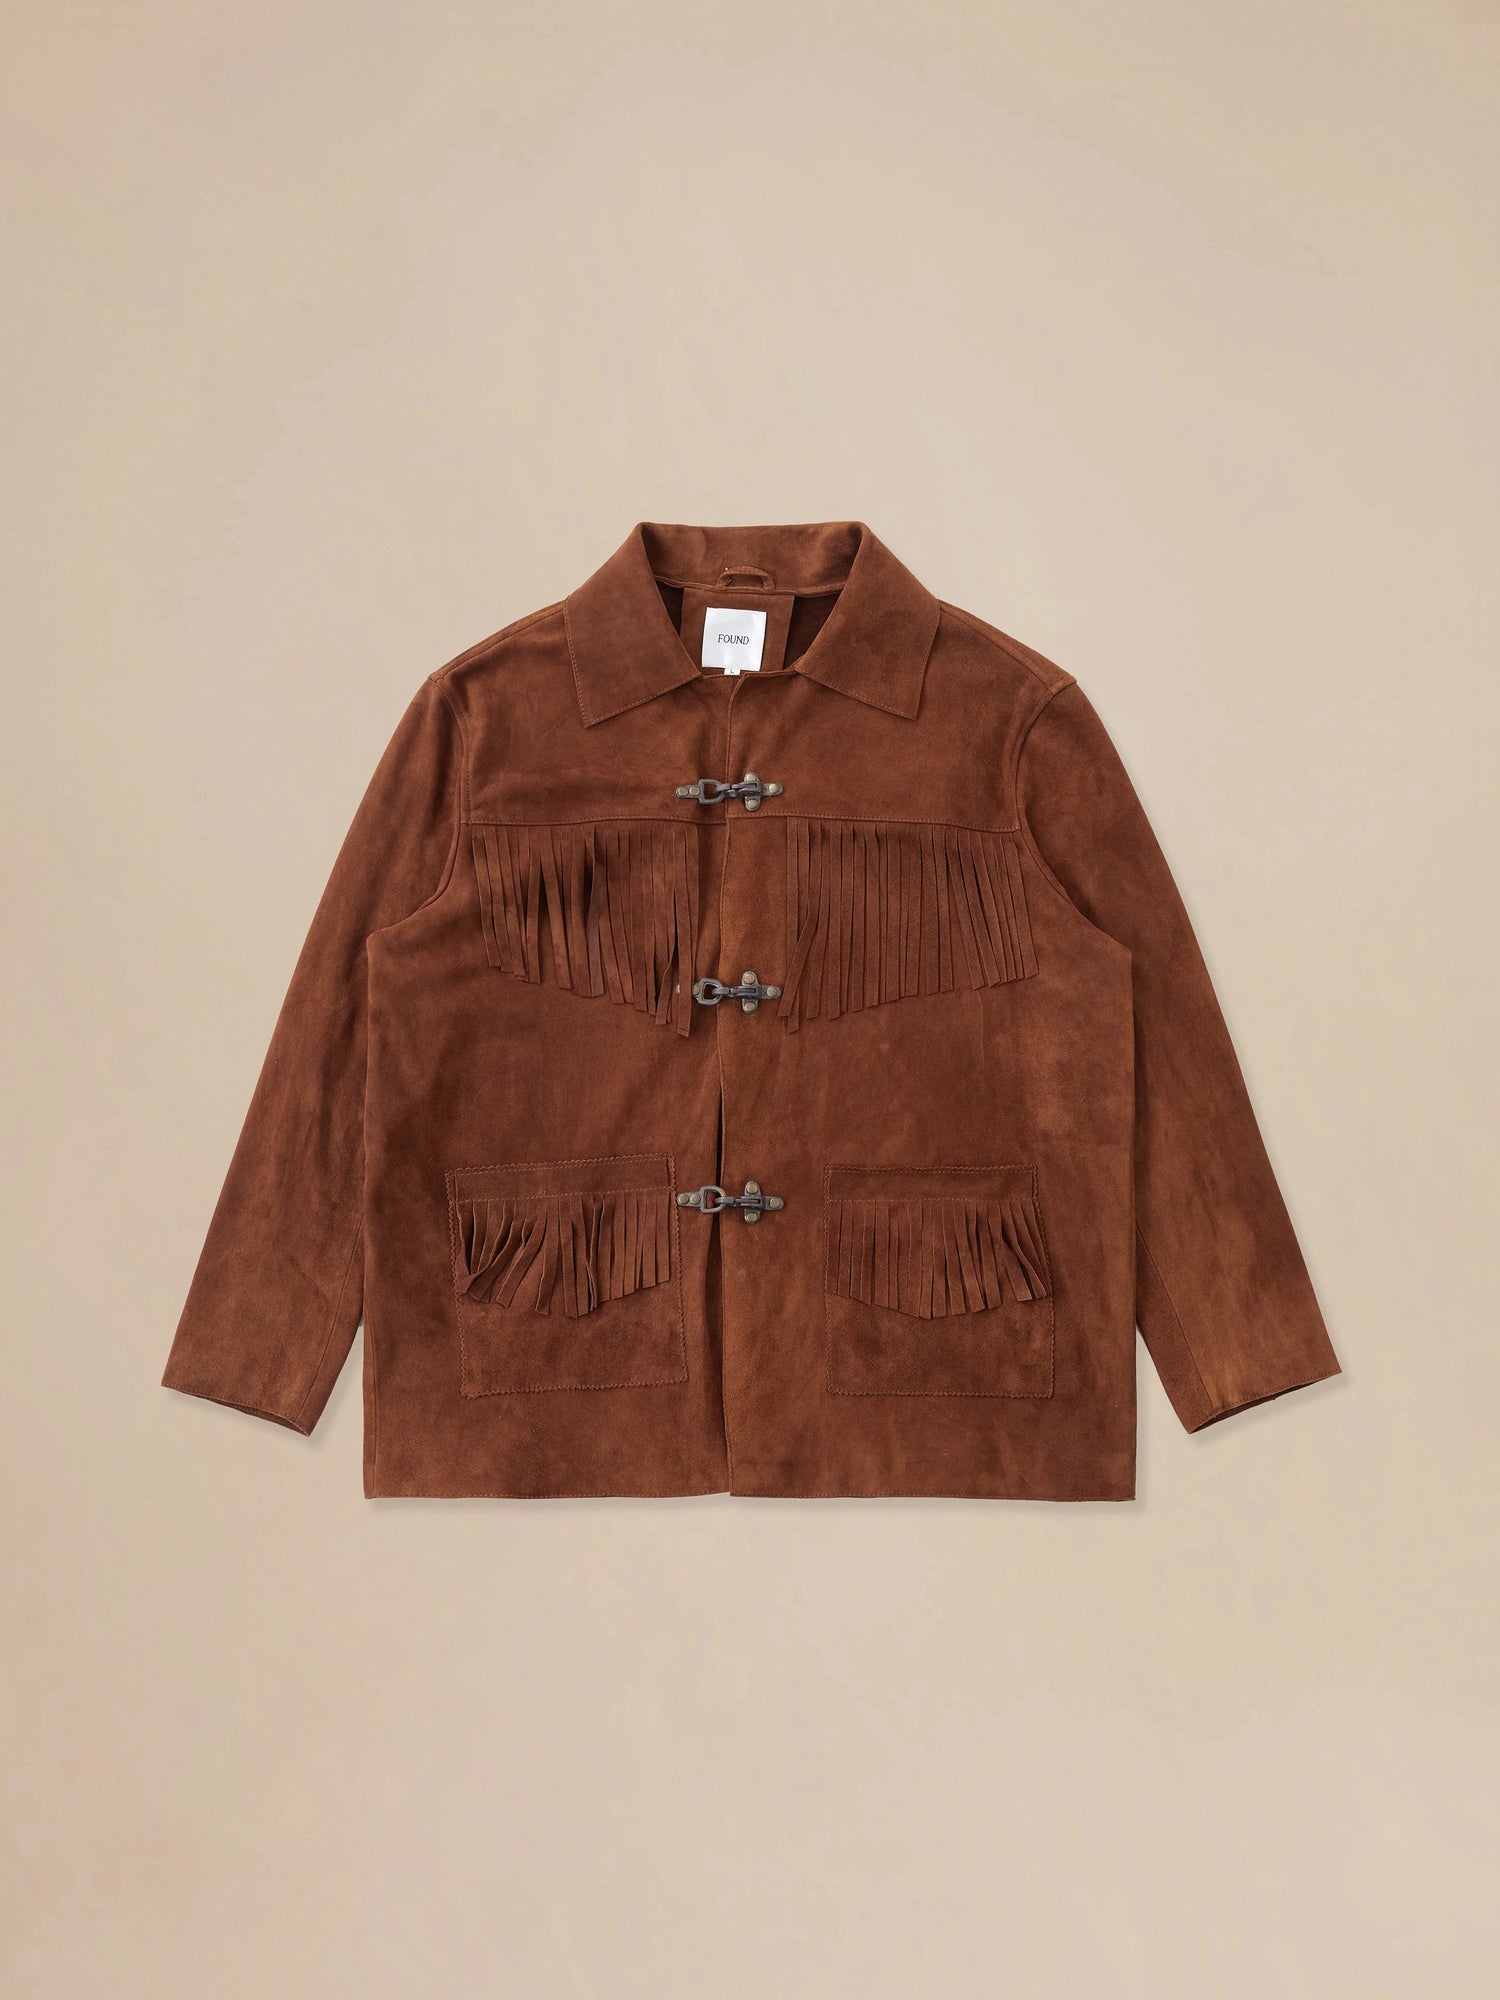 A Found Tobacco Fringe Suede Buckle Jacket with fringes.